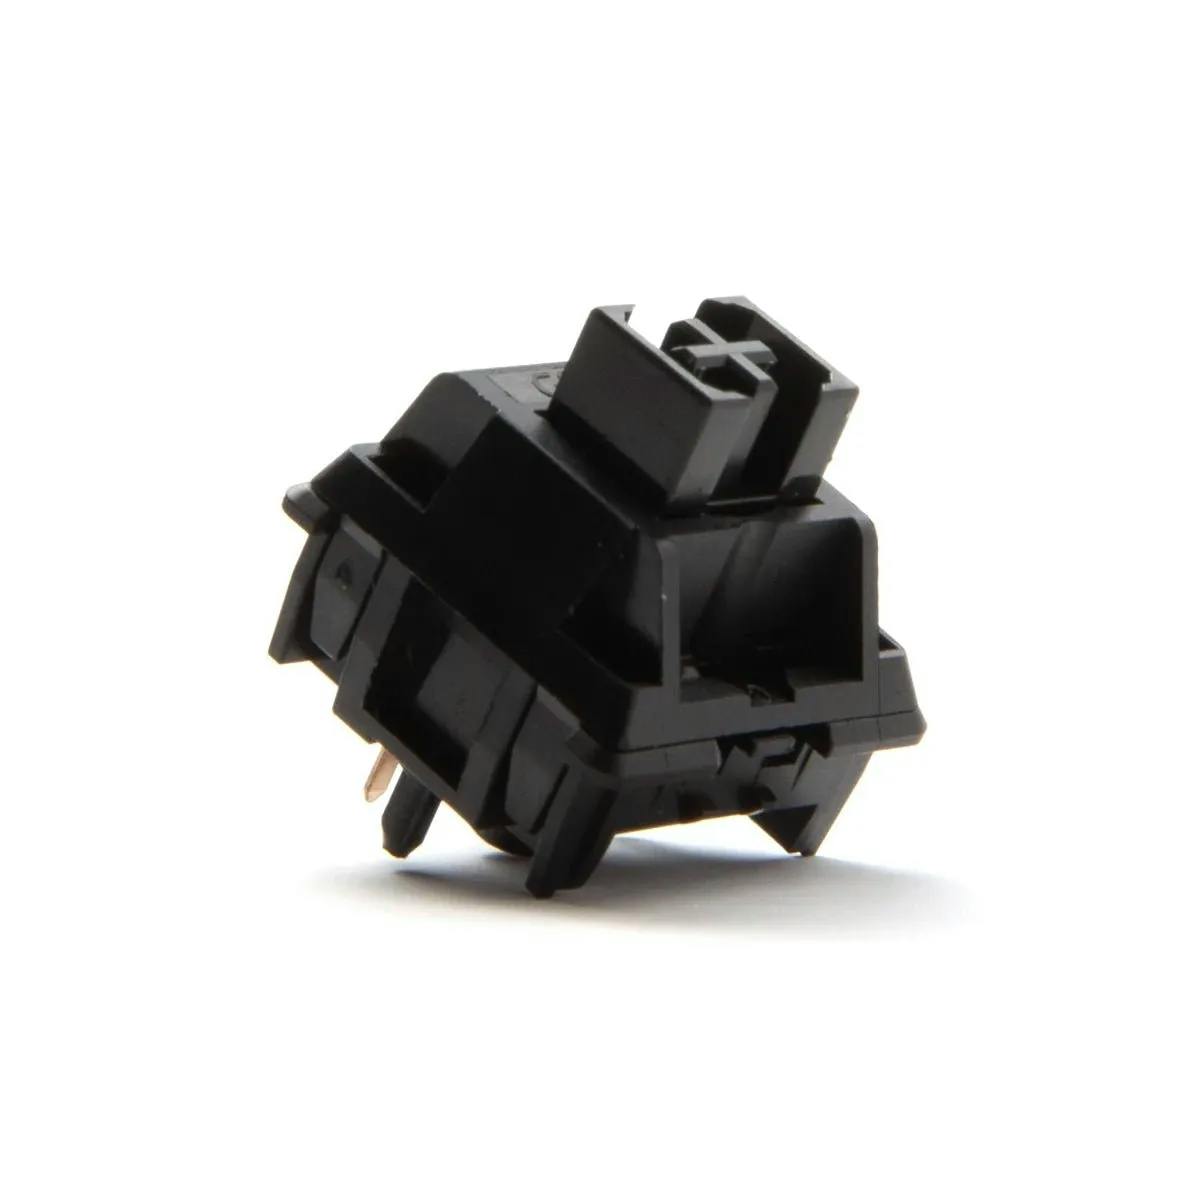 Image for Haimu x Geon HG Black Linear Switches